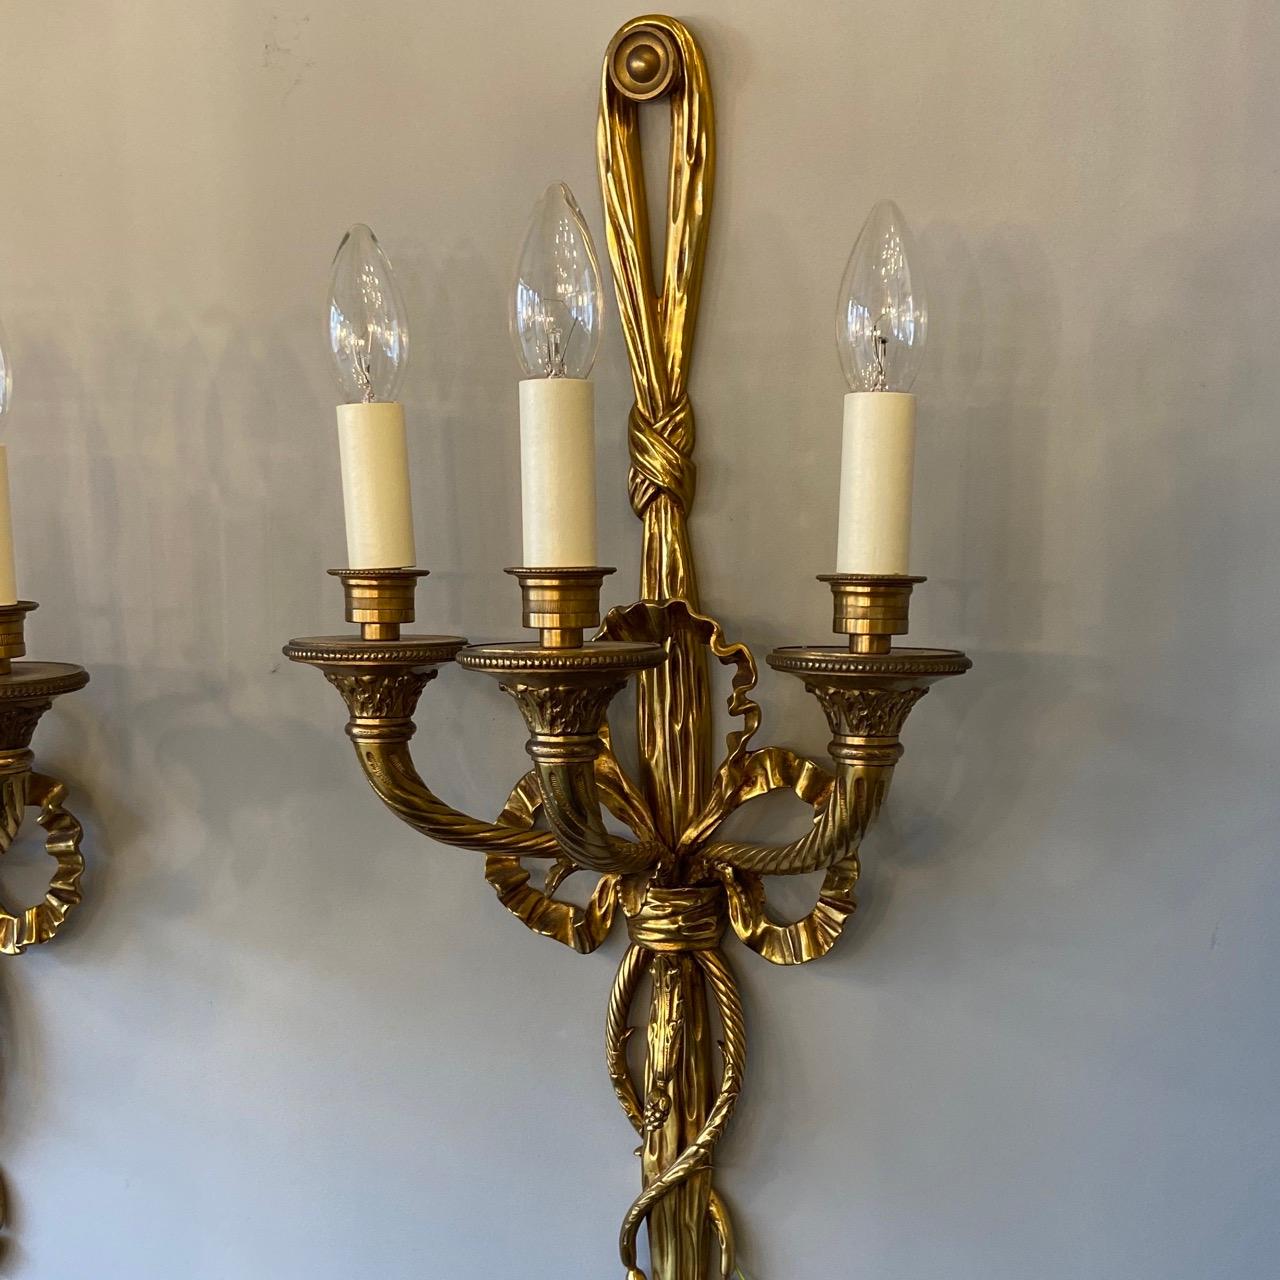 A quality French pair of gilded bronze triple arm antique wall lights, the barley twisted scrolling arms with leaf clad trumpet millgrain bobeche drip pans and candle sconces, issuing from a decoratively cast elongated rope and tassel pierced